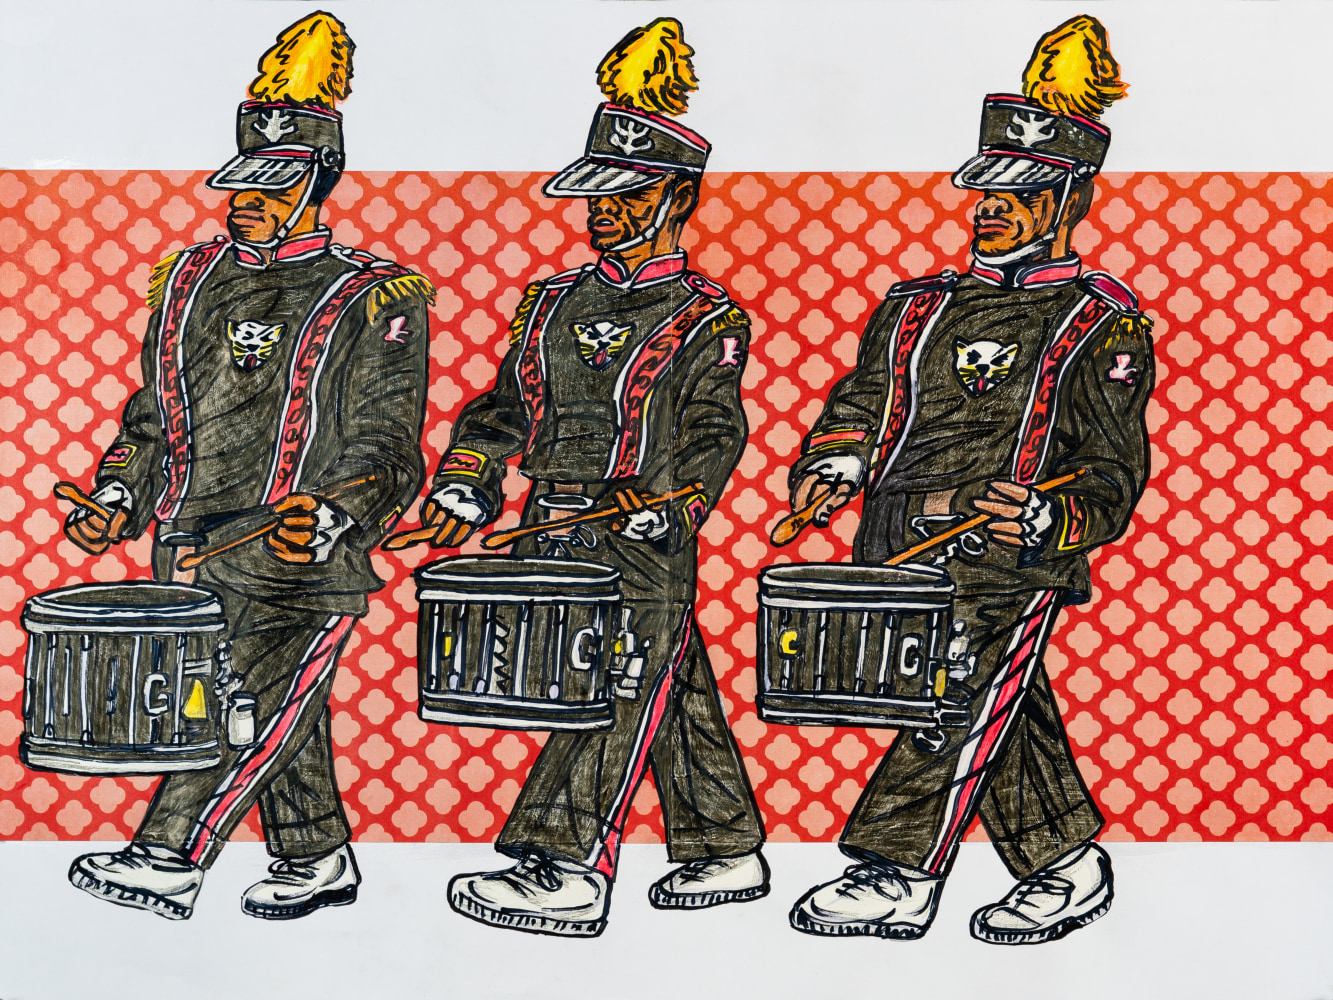 Keith Duncan
Grambling State University Drum Line, 2020
Colored pencil and marker on paper
18 x 24 inches&amp;nbsp;